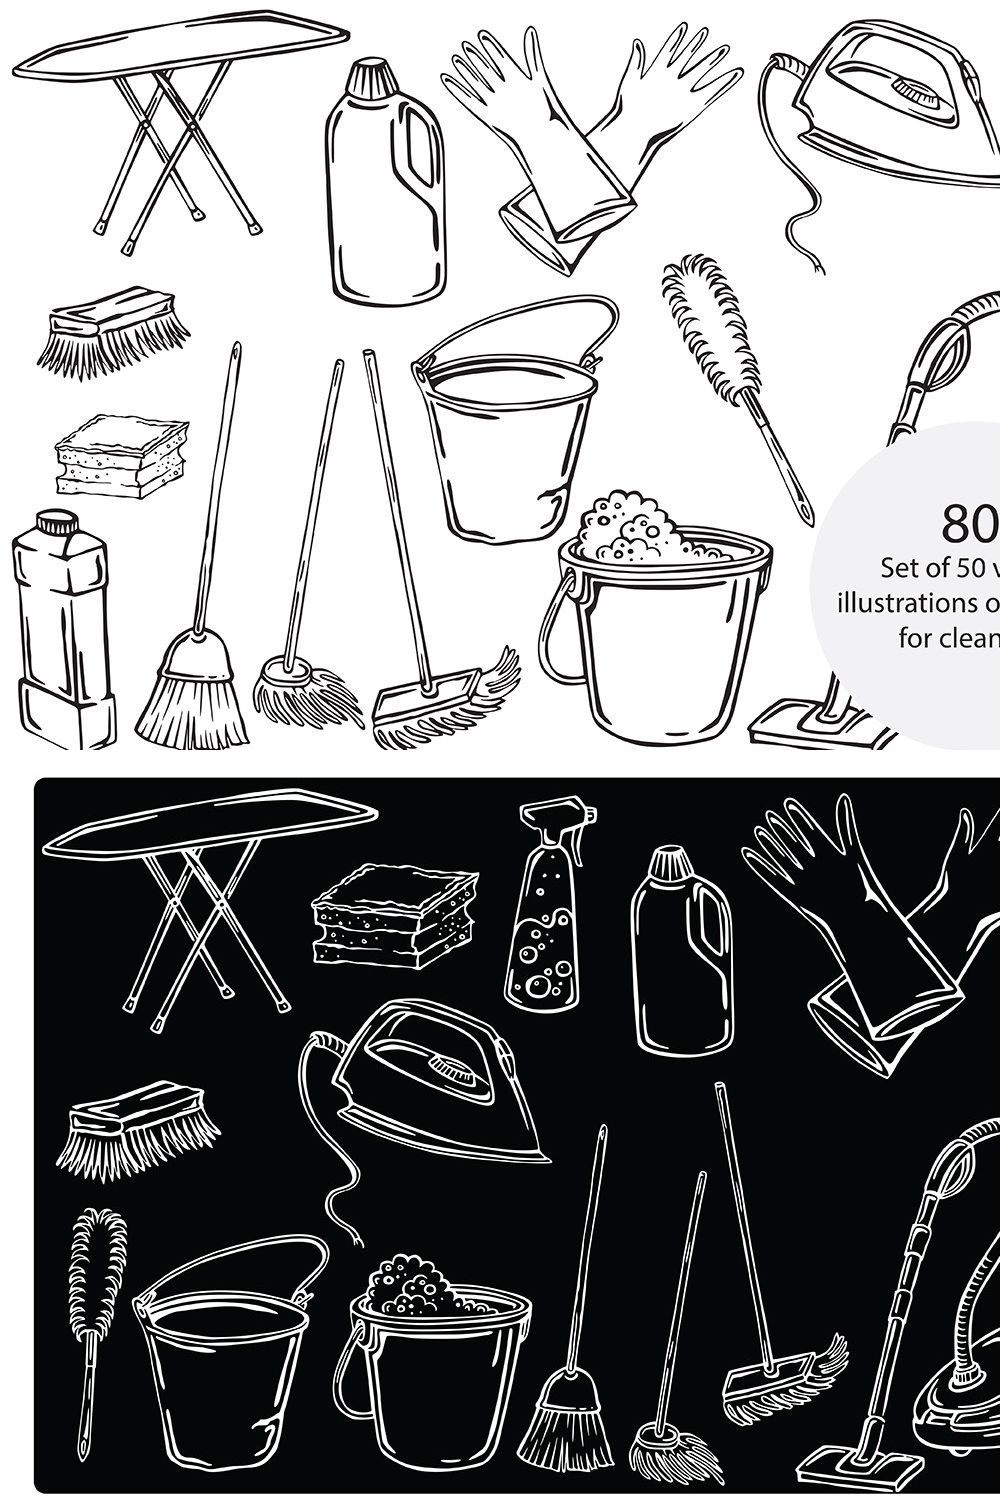 Cleaning tools pinterest preview image.